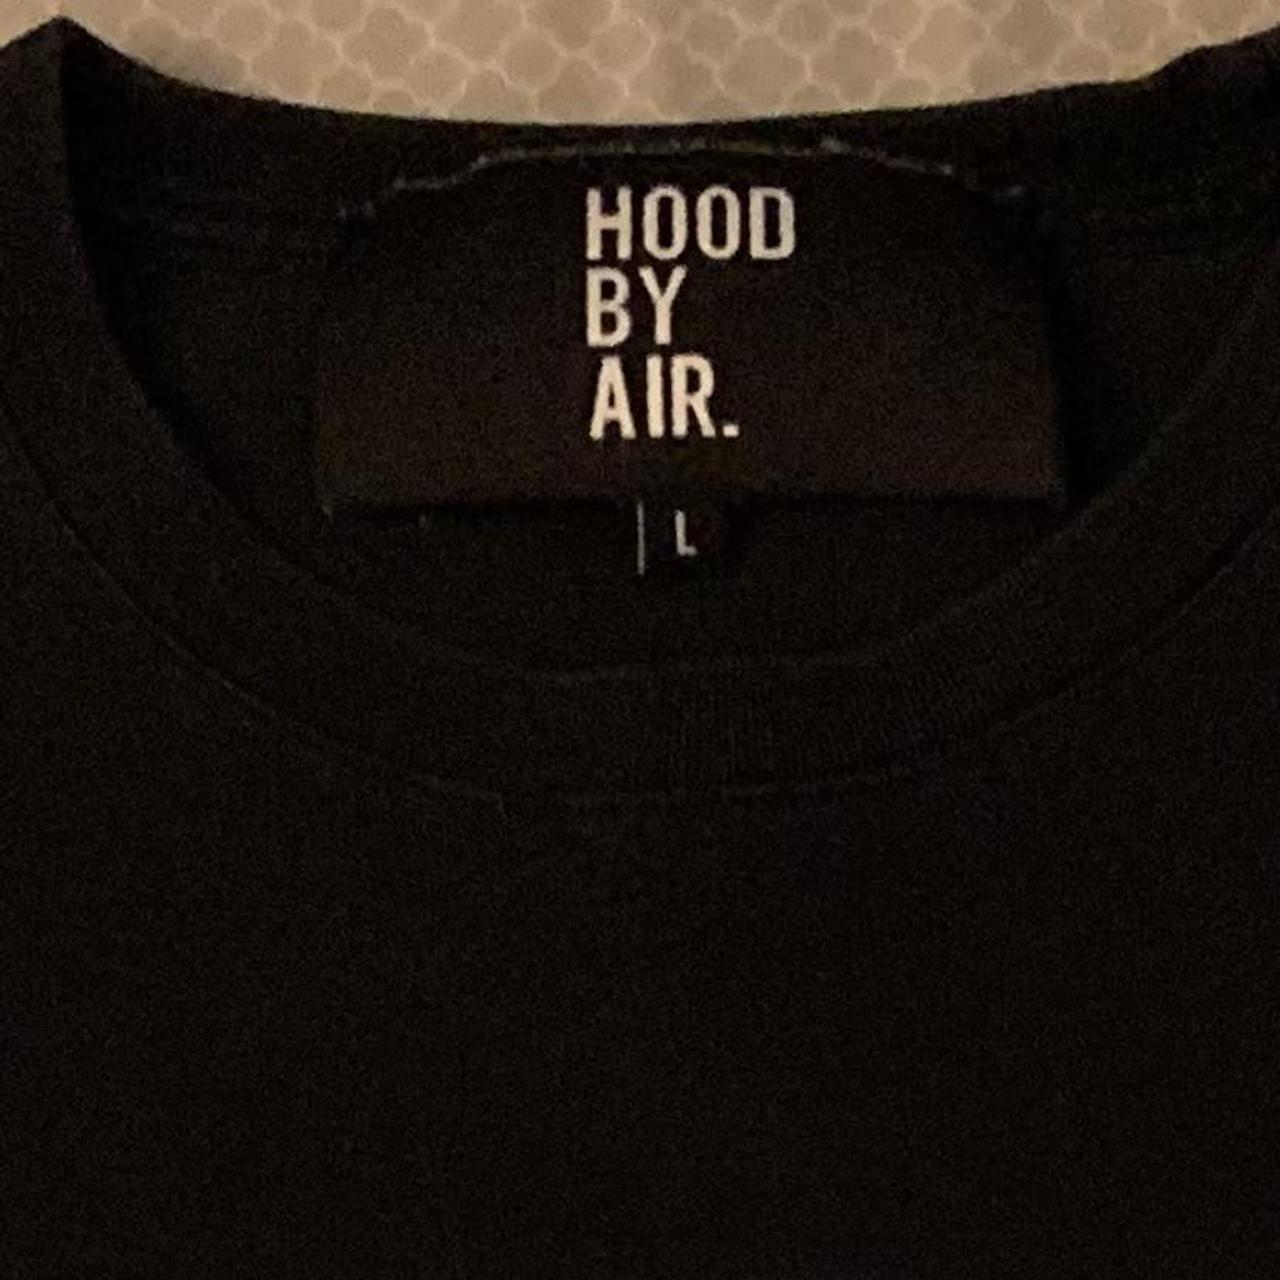 Hood By Air Men's White and Black T-shirt (2)